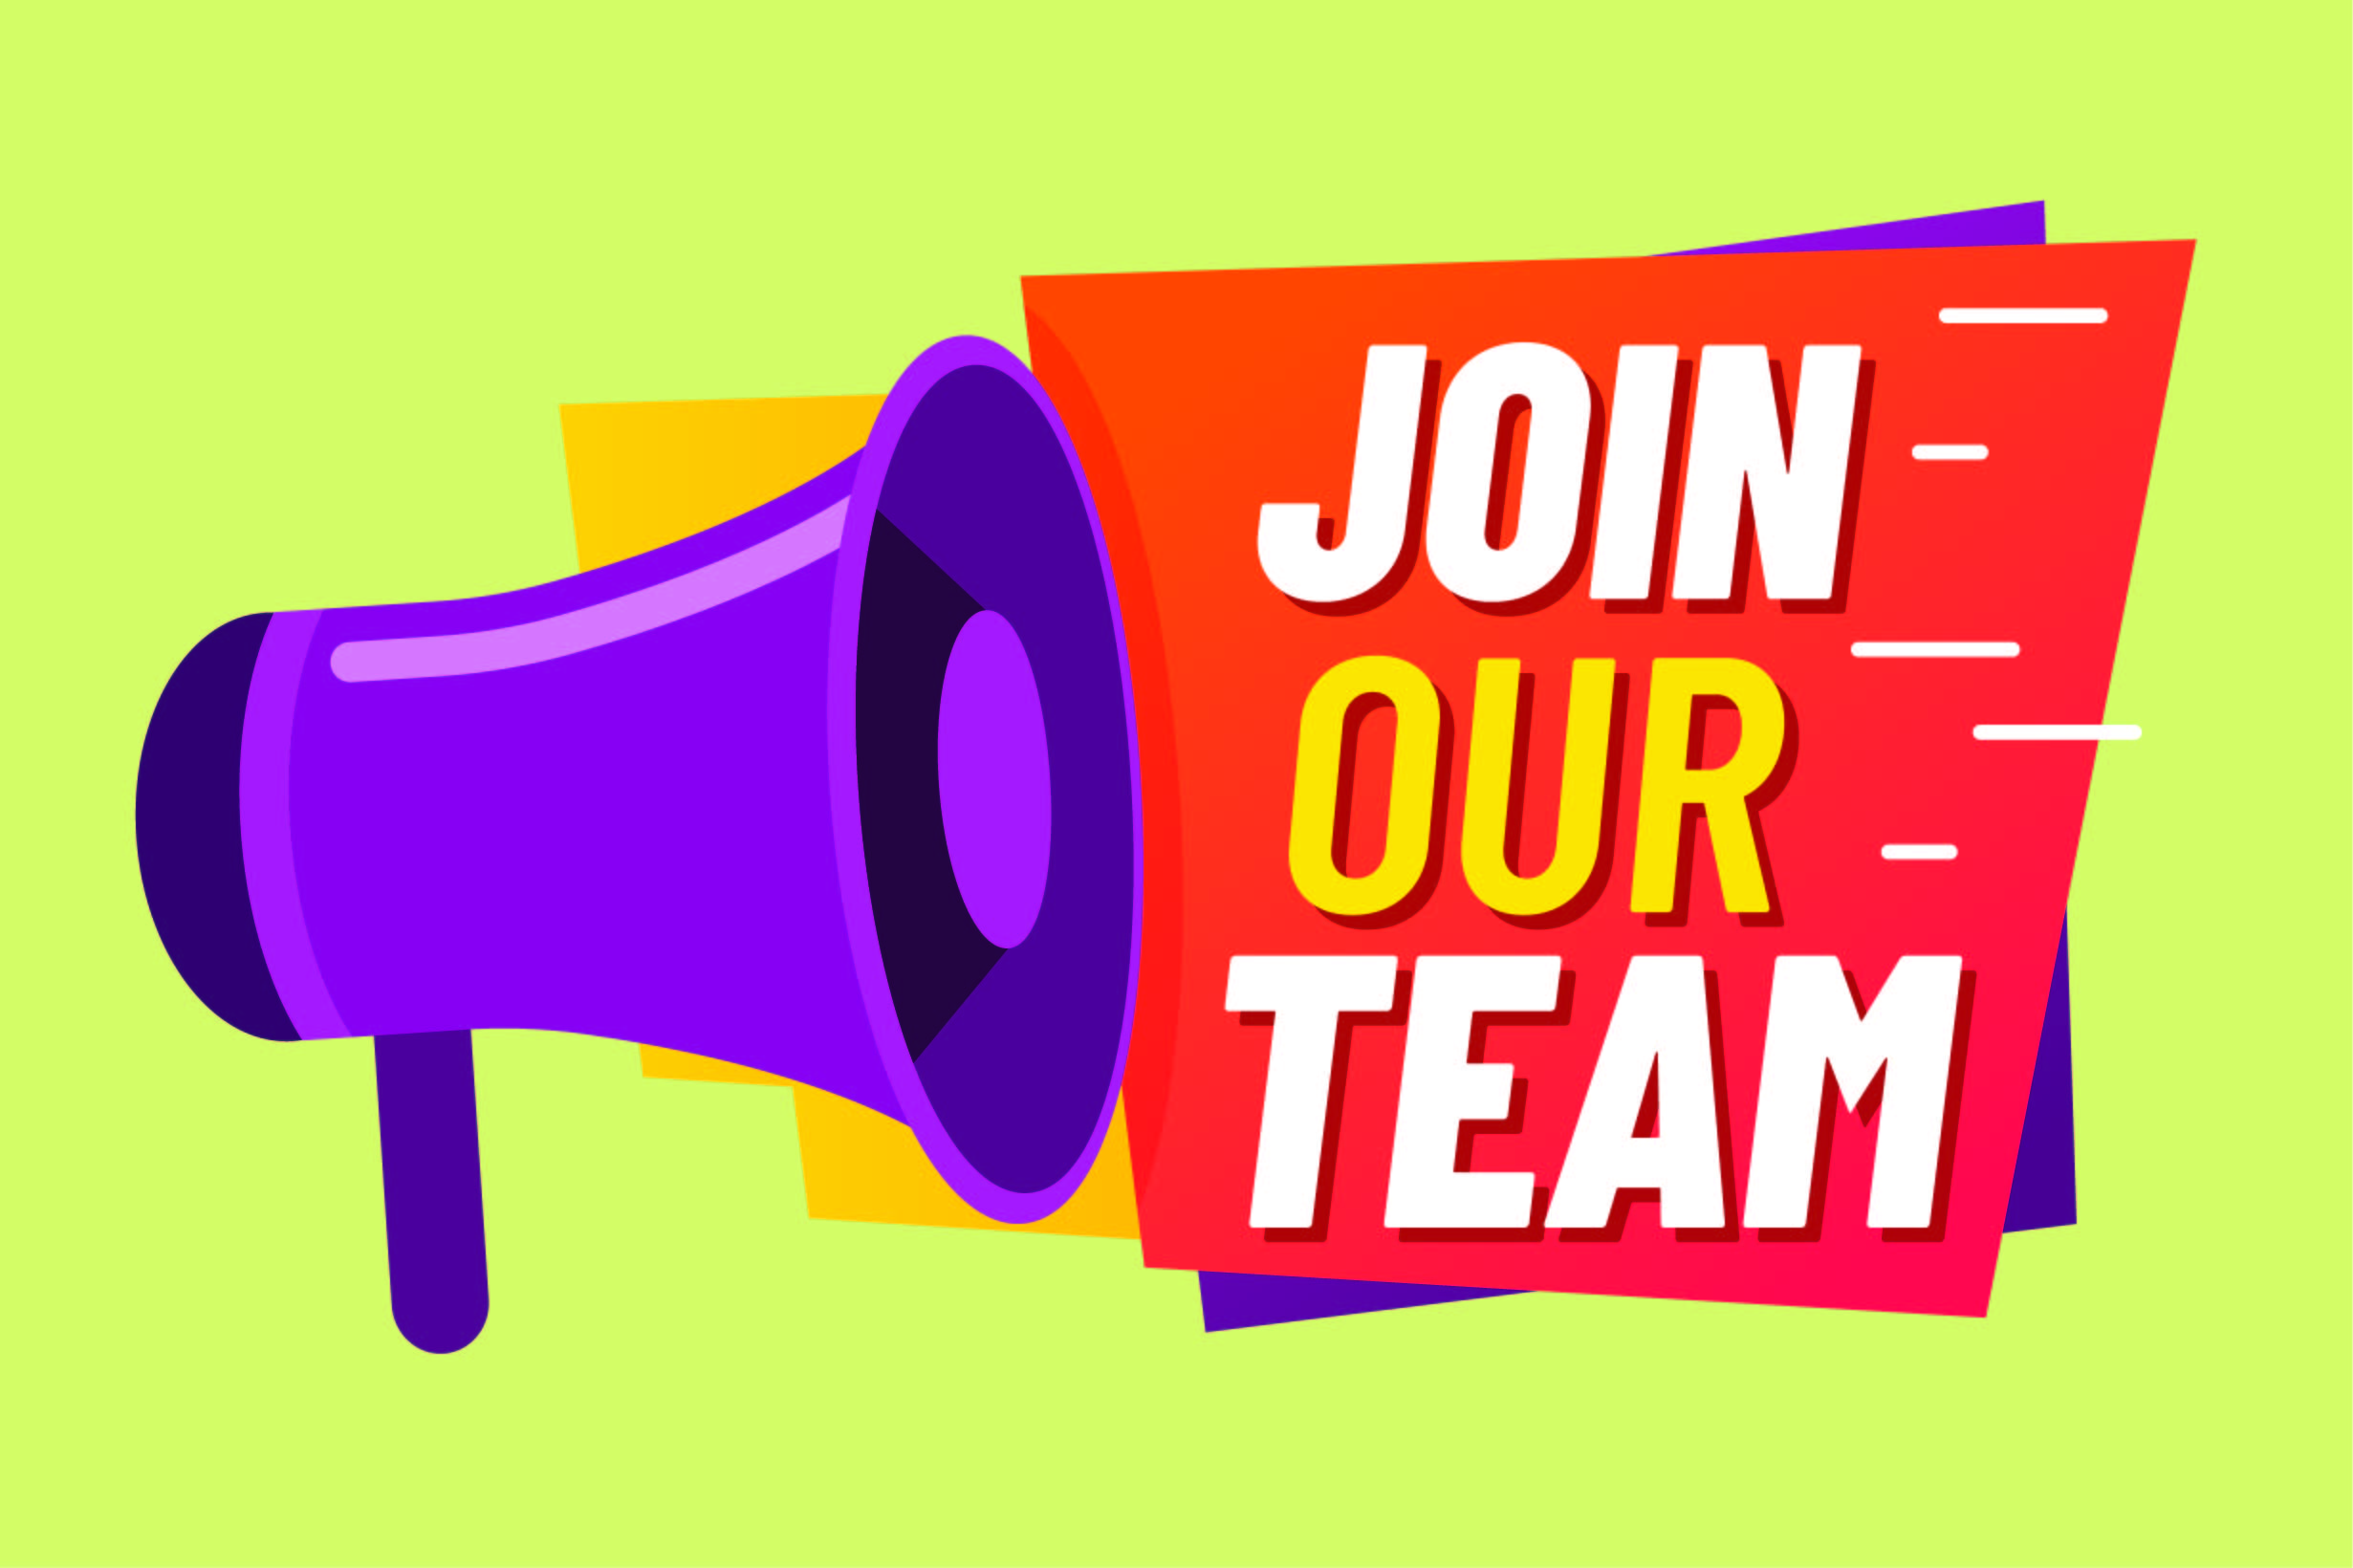 Join our team - telemarketing specialist